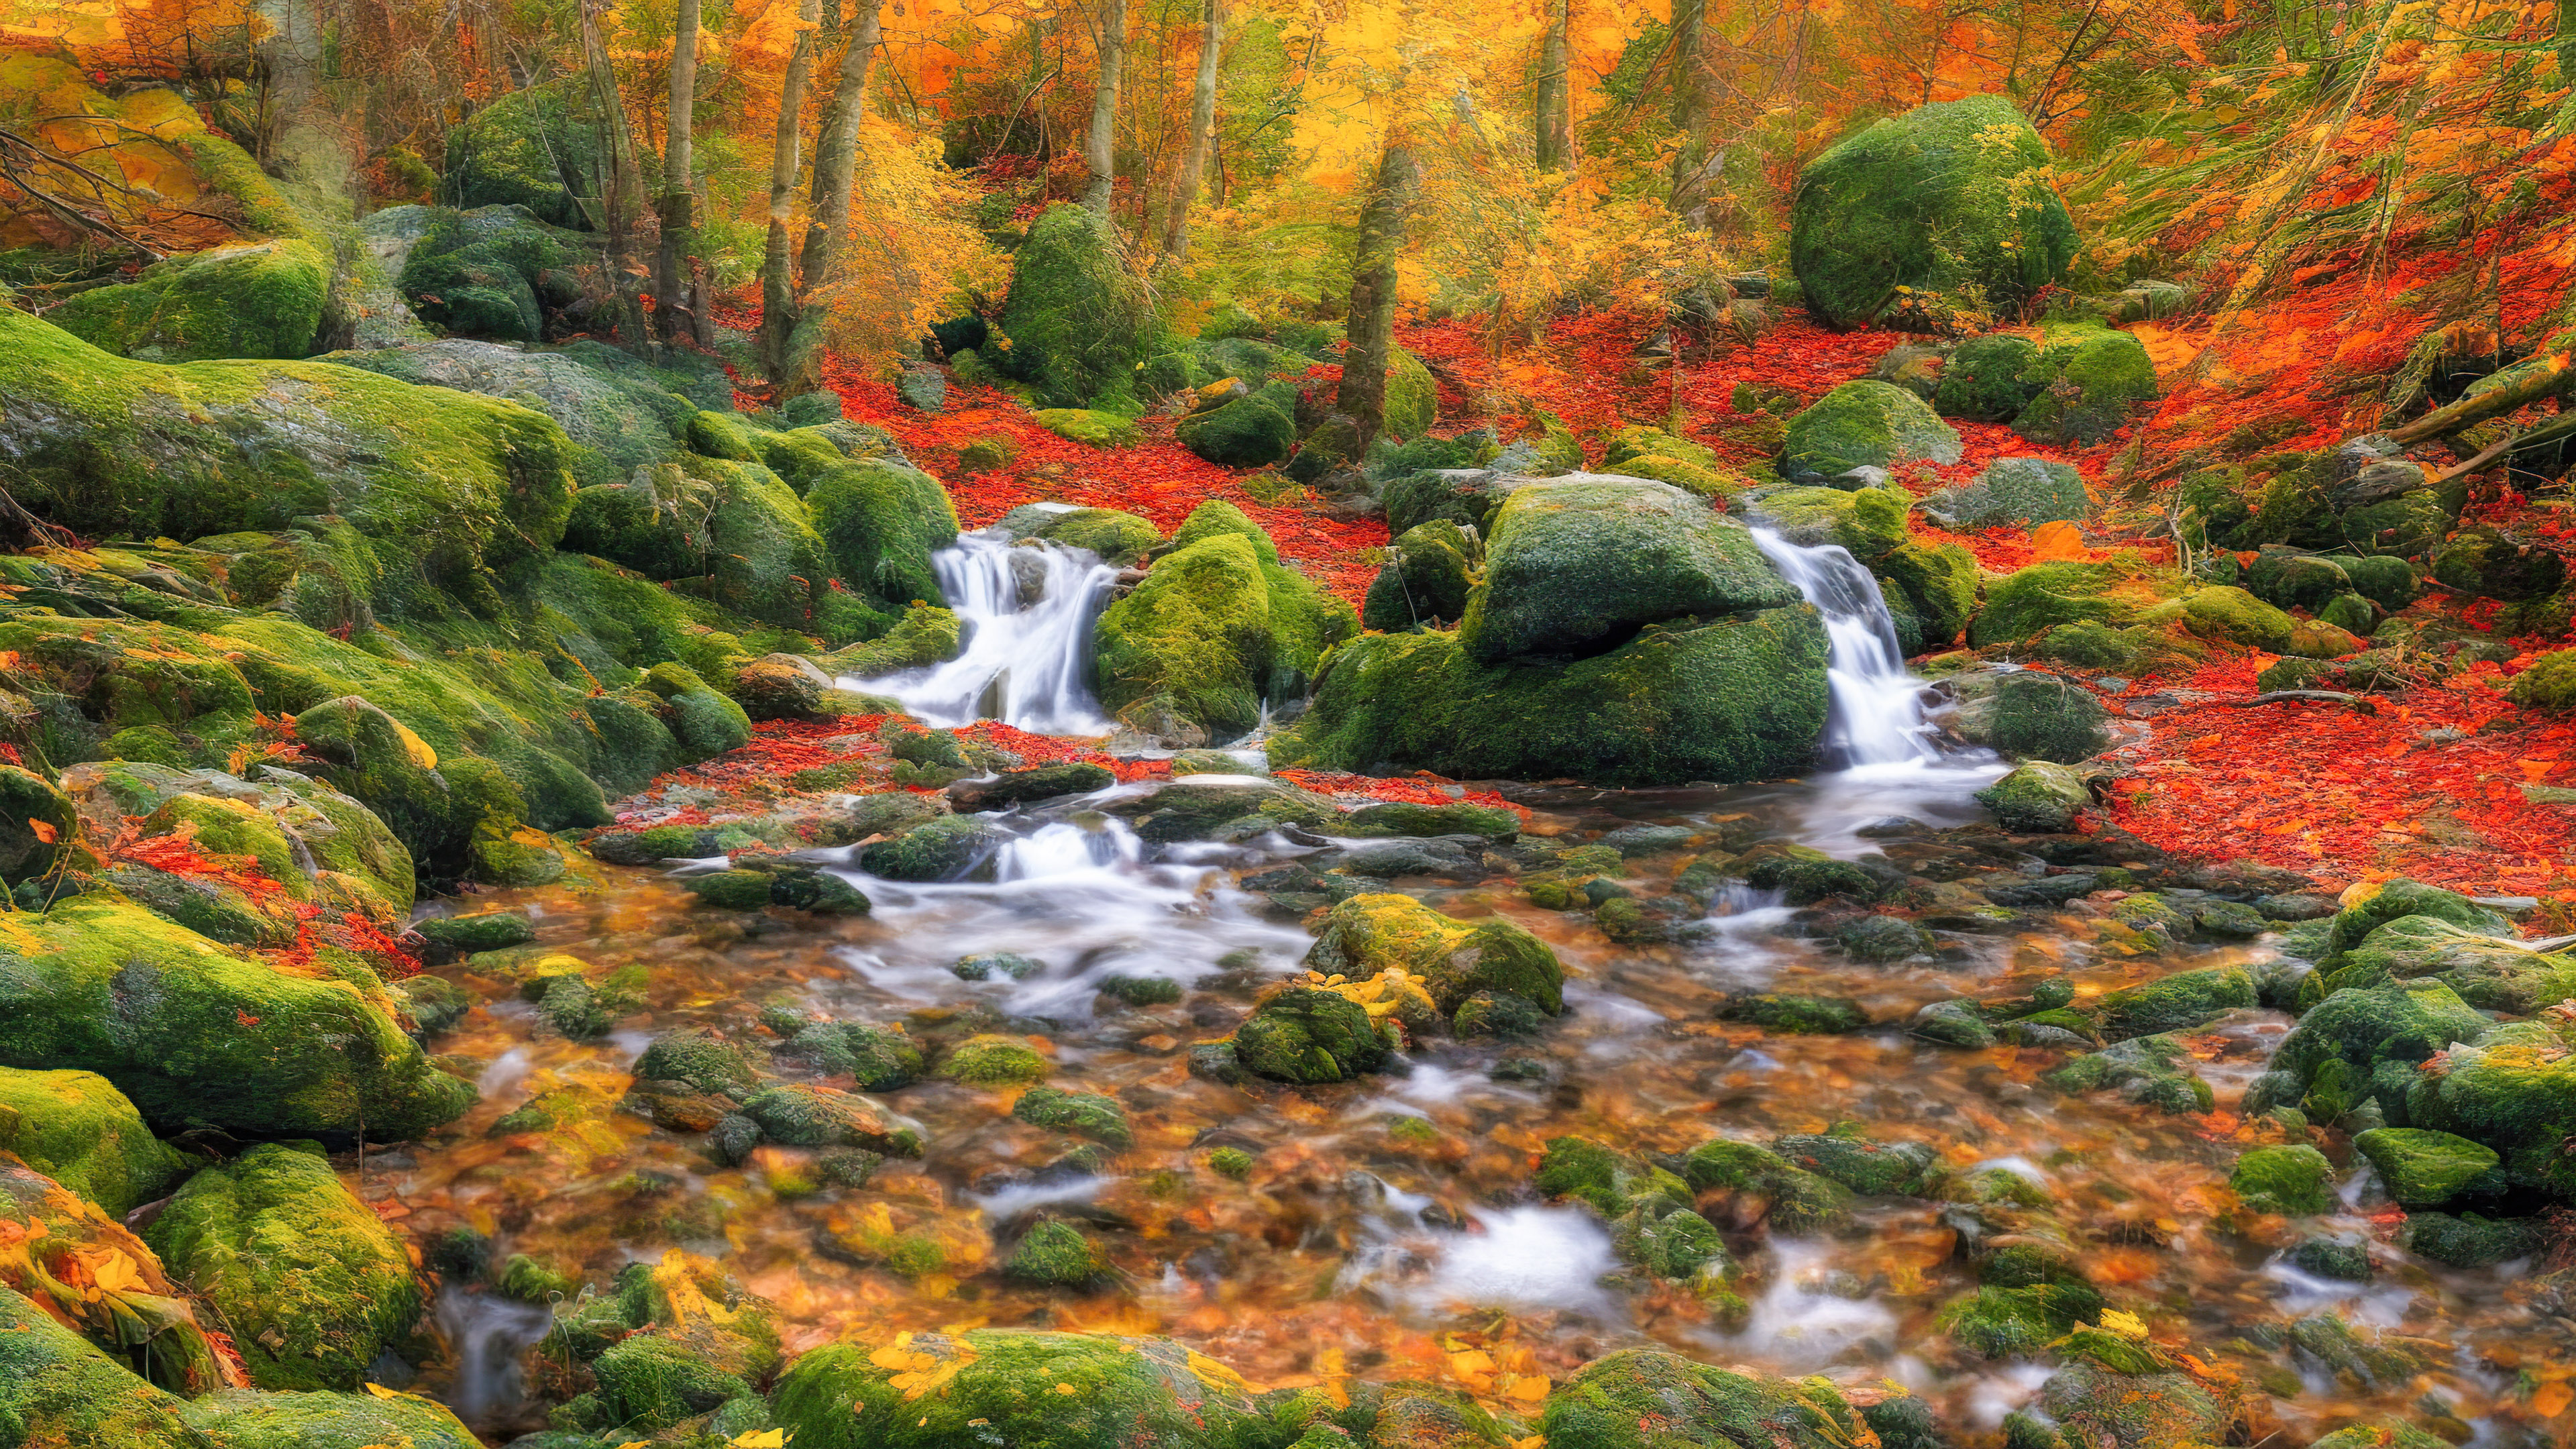 Experience the tranquility of our landscape PC wallpaper, featuring a tranquil forest scene with a winding stream, surrounded by vibrant autumn foliage.